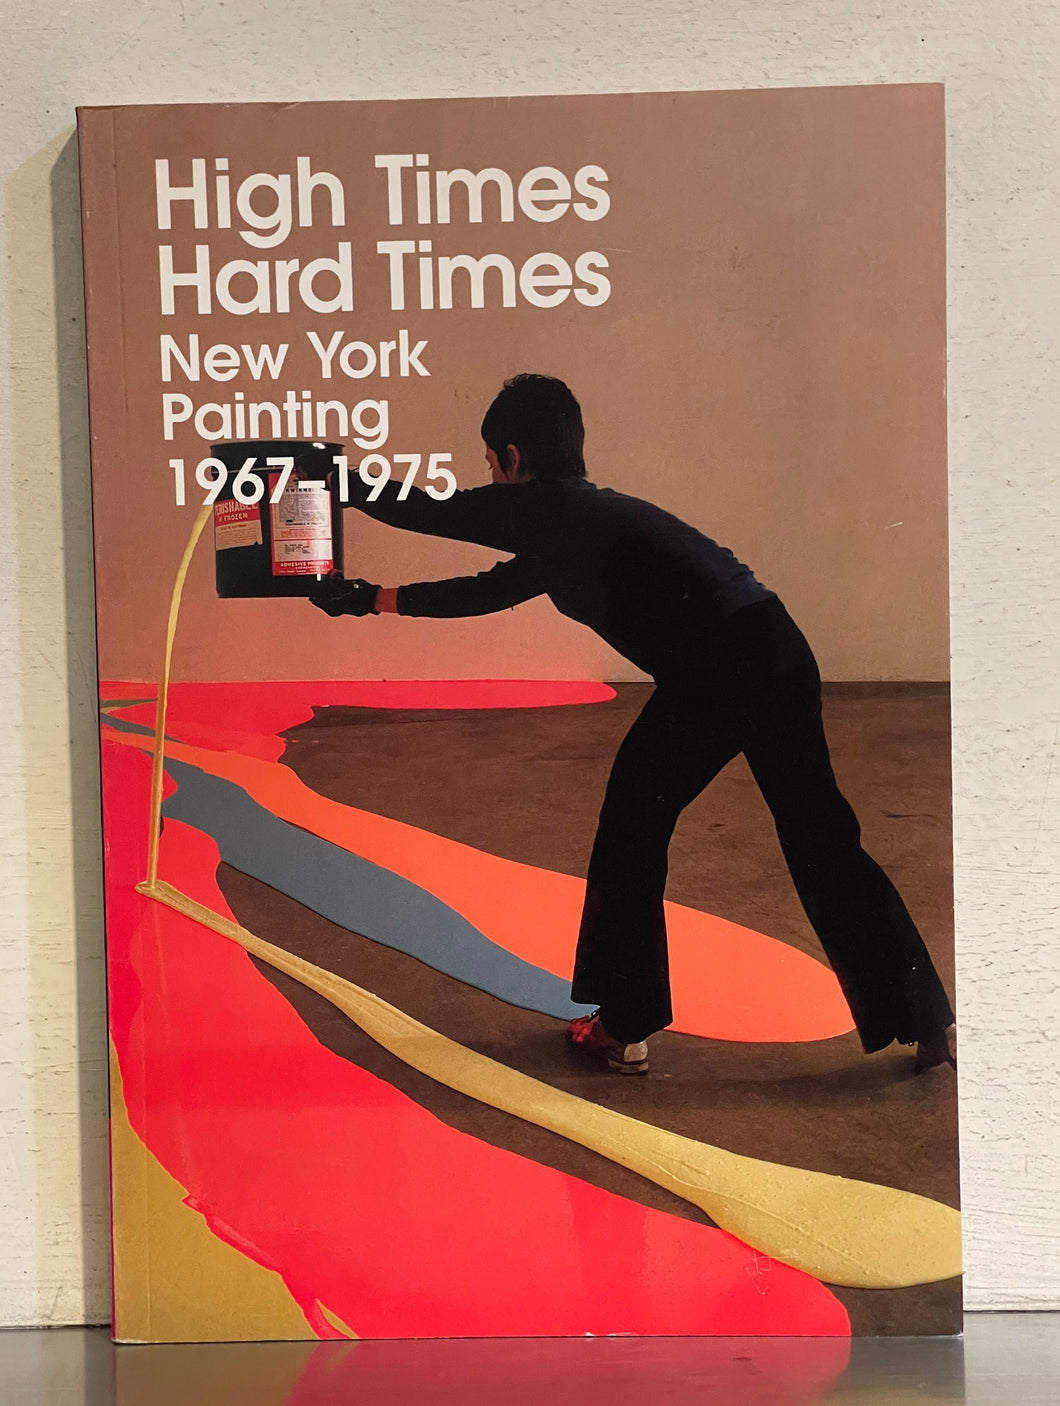 High Times, Hard Times: New York Painting 1967-1975